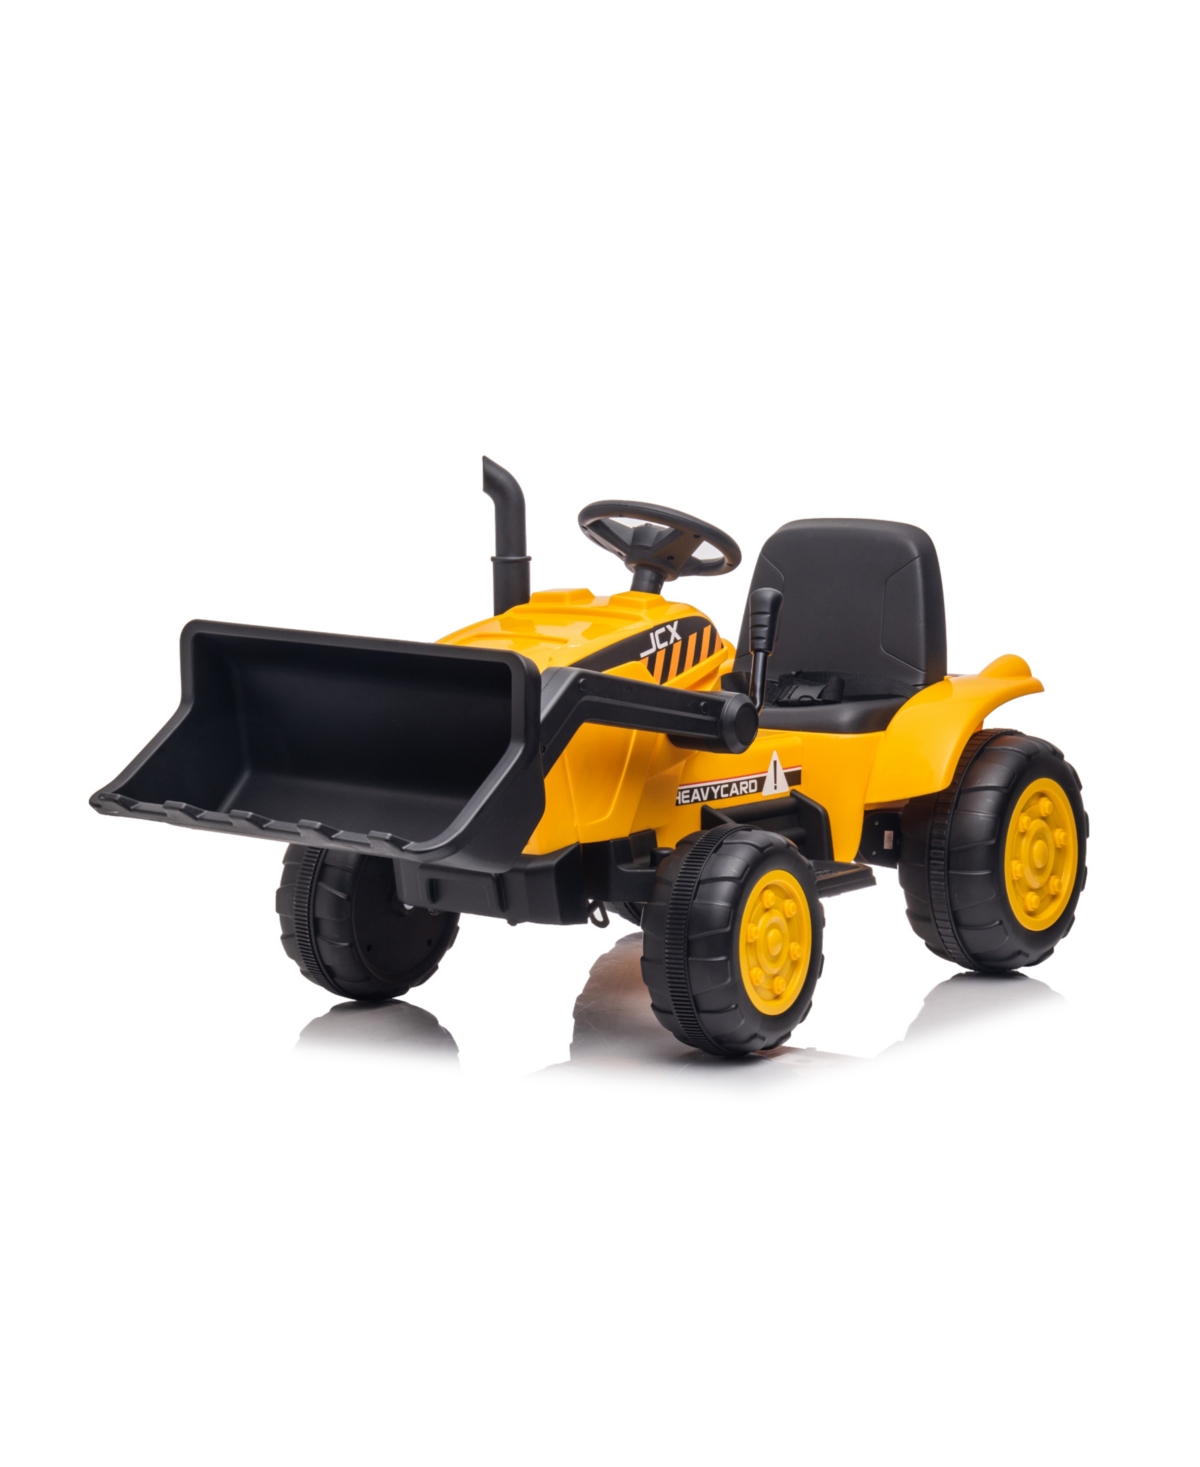 Freddo Babies' 12v Excavator 1 Seater Ride On For Kids In Yellow